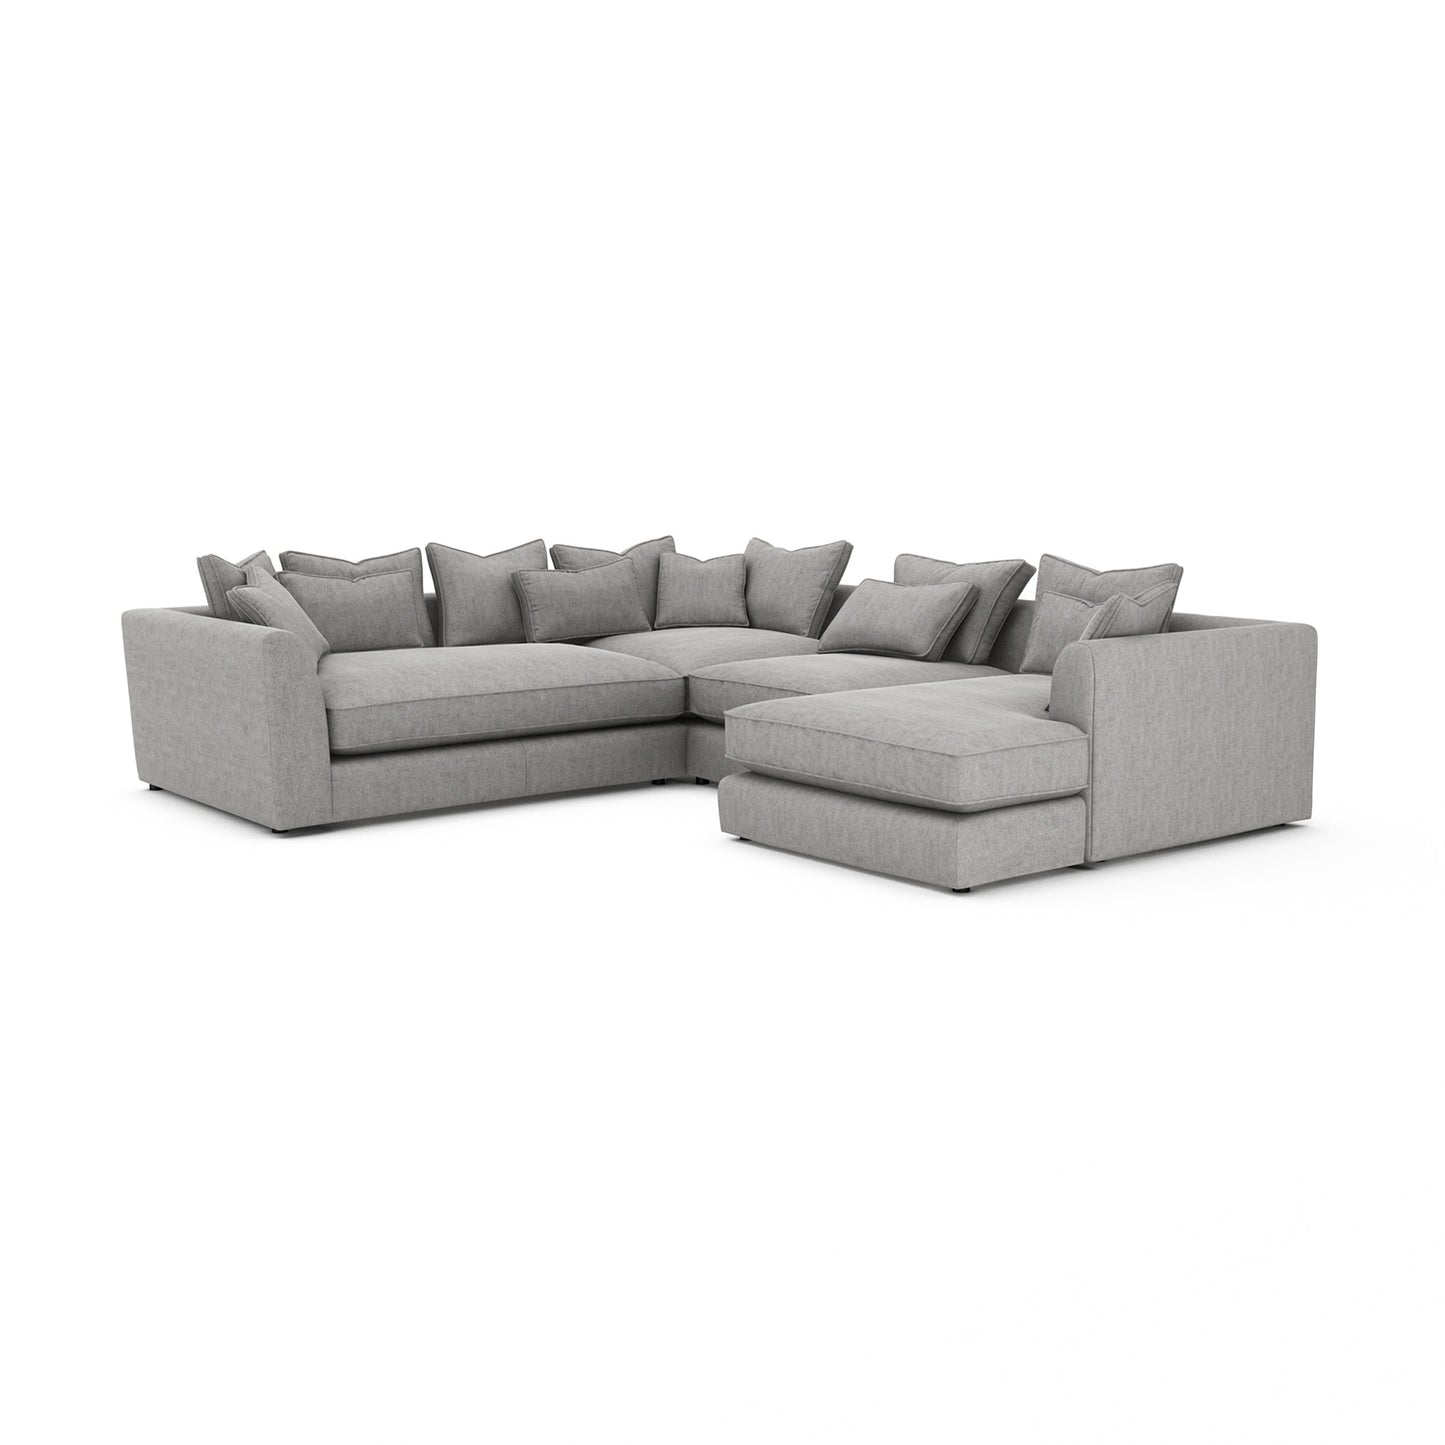 Ursula Combi Sofa With Chaise - 2a